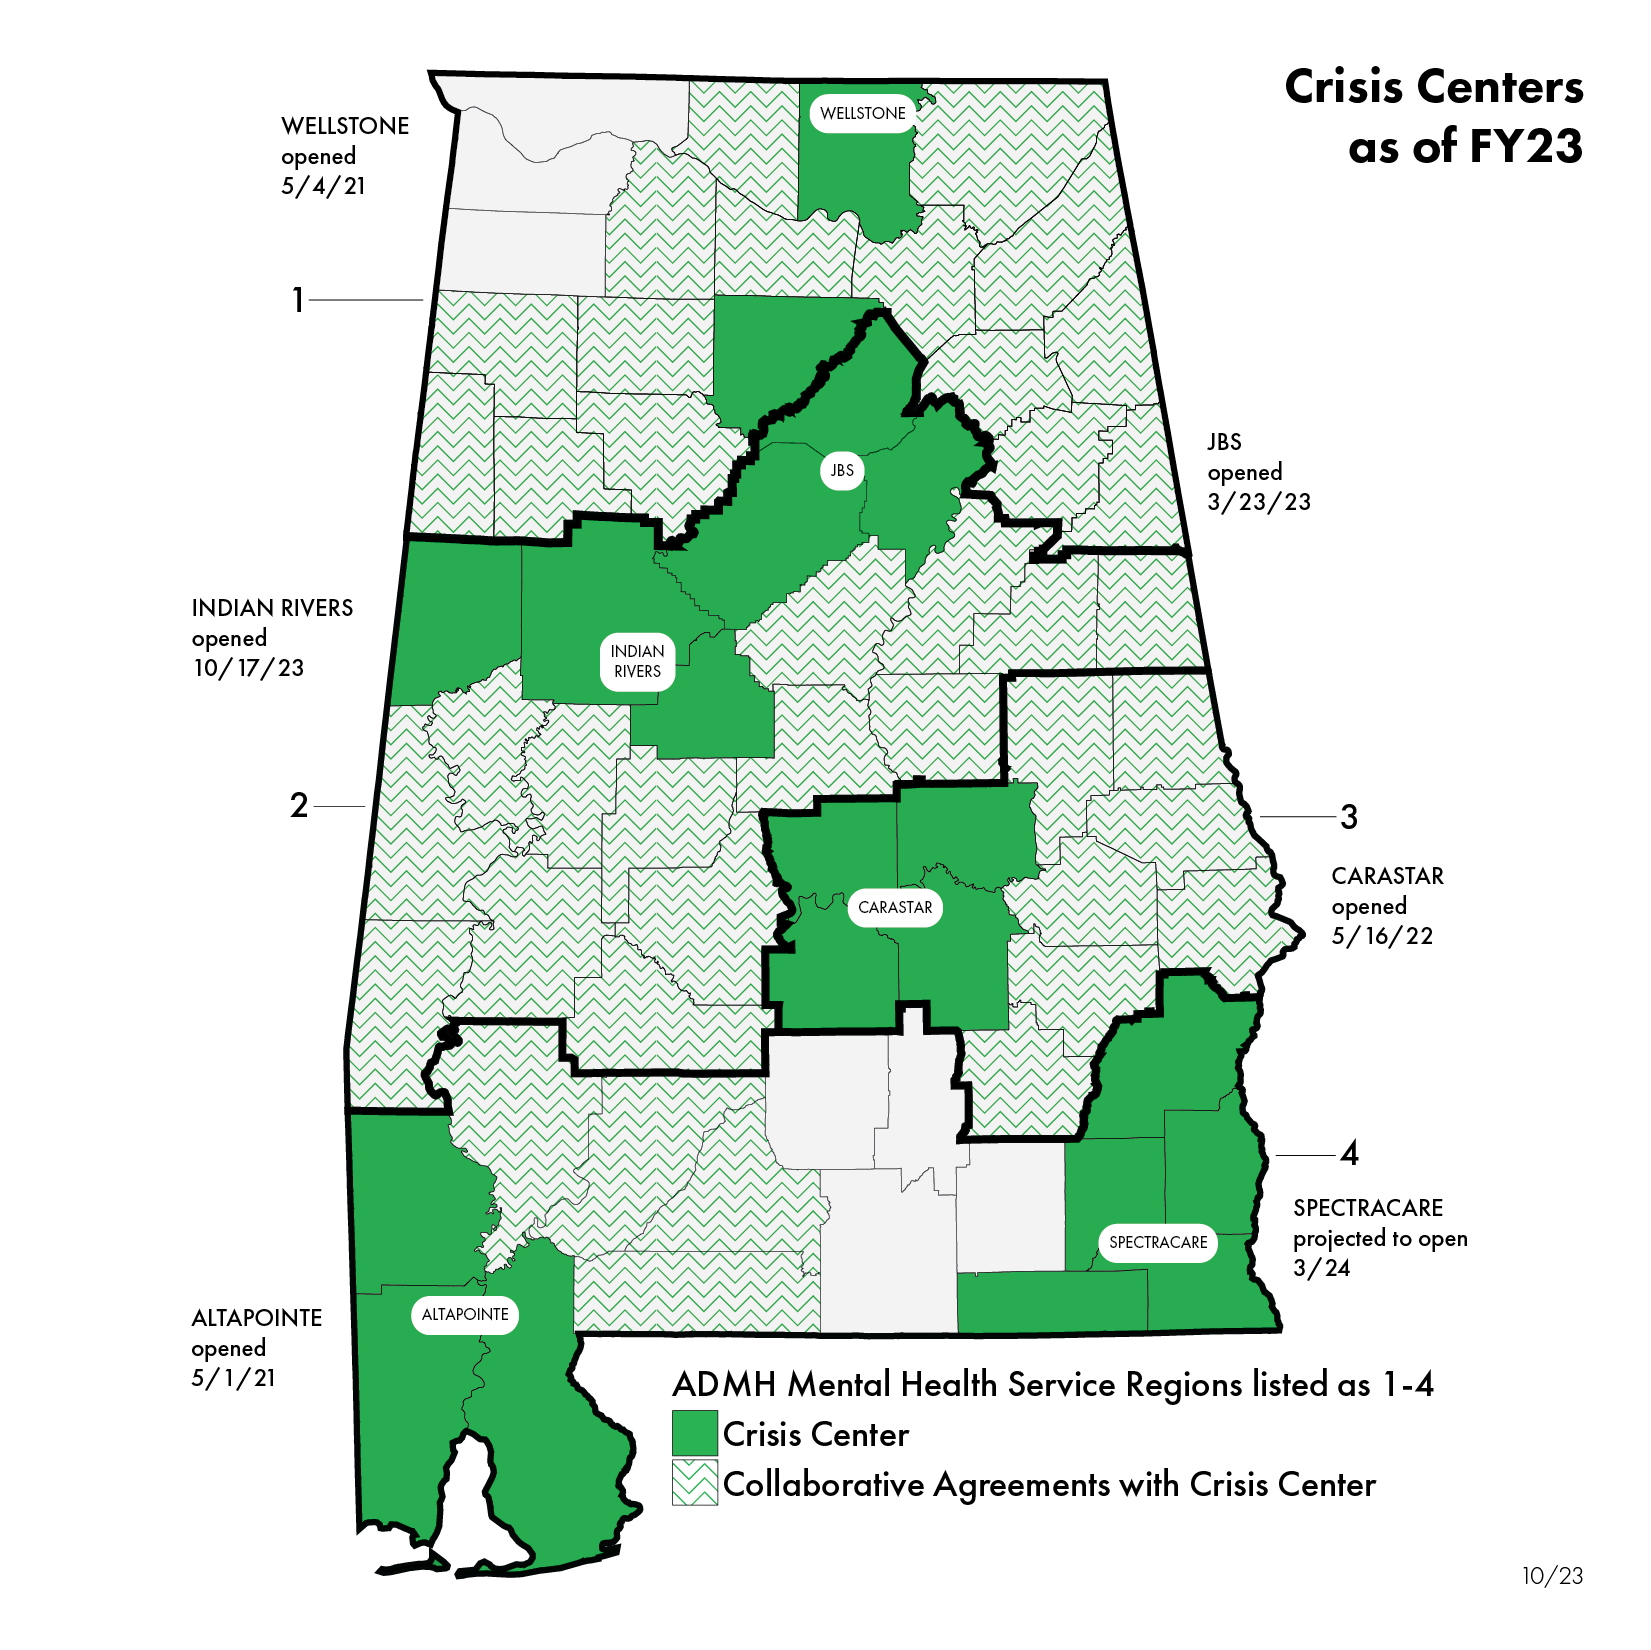 Map of Alabama showing counties being covered by operational and future Crisis Centers 